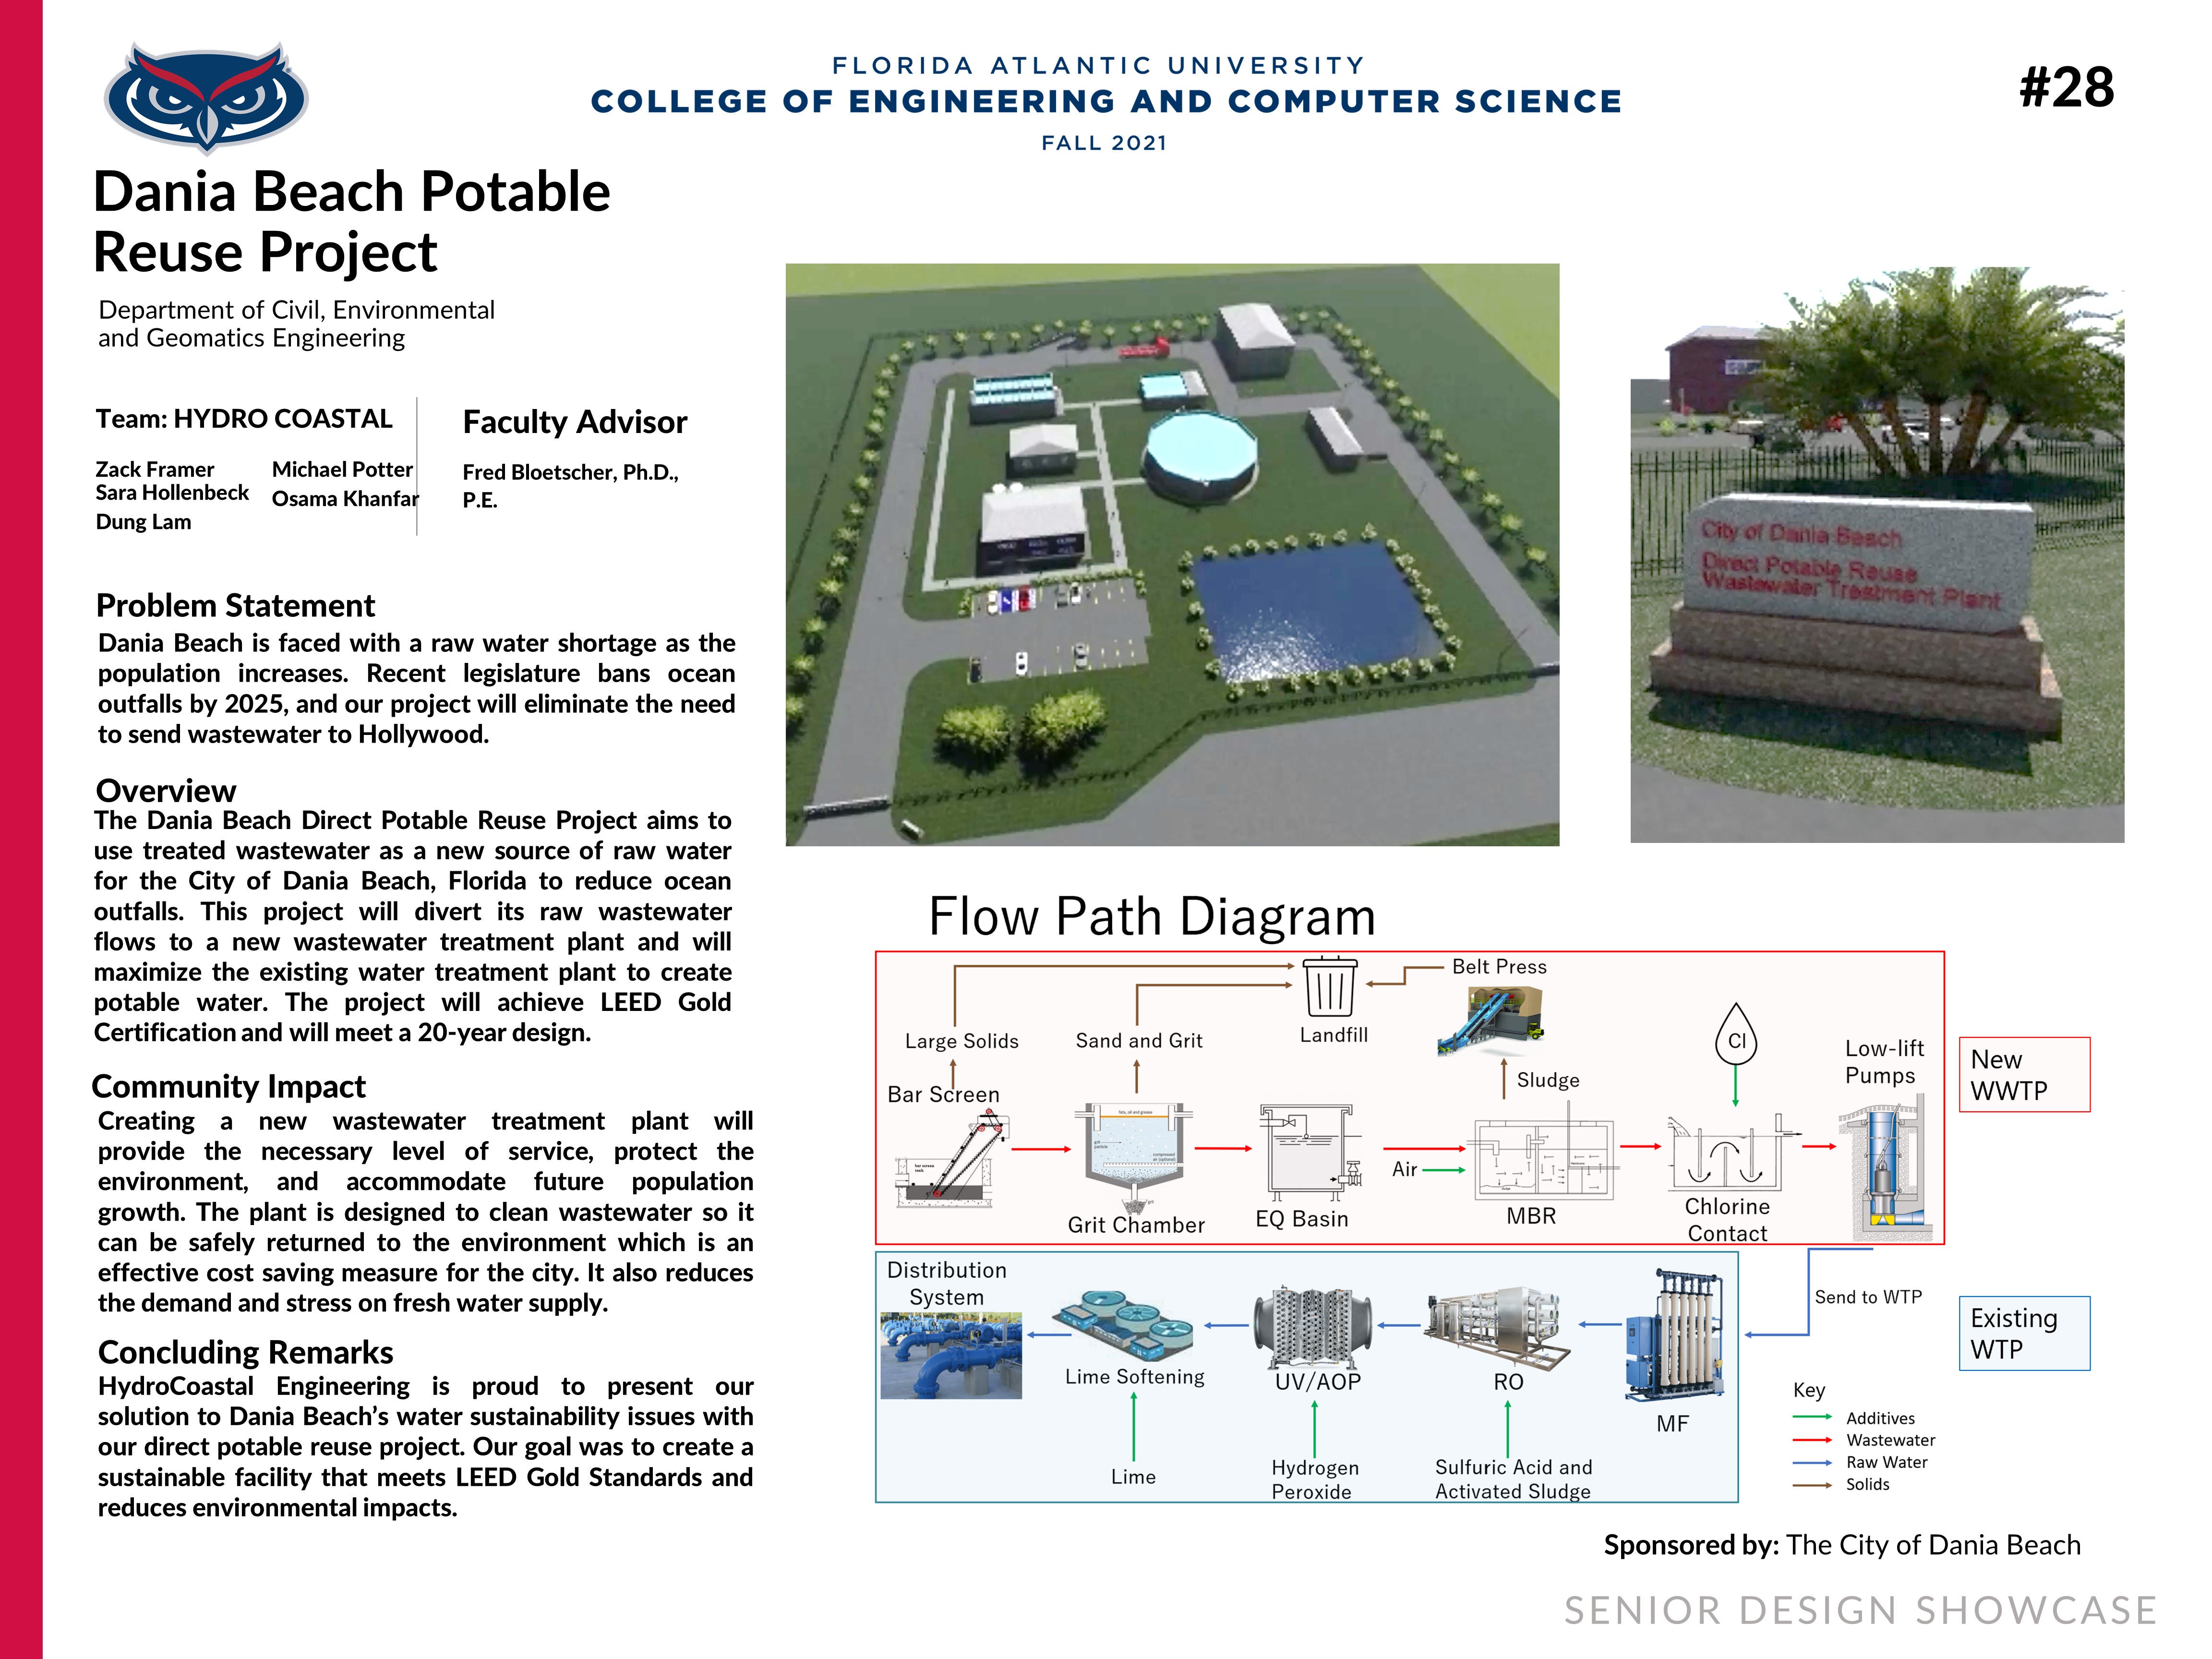 The City of Dania Beach Direct Potable Reuse Project (HydroCoastal Engineering)